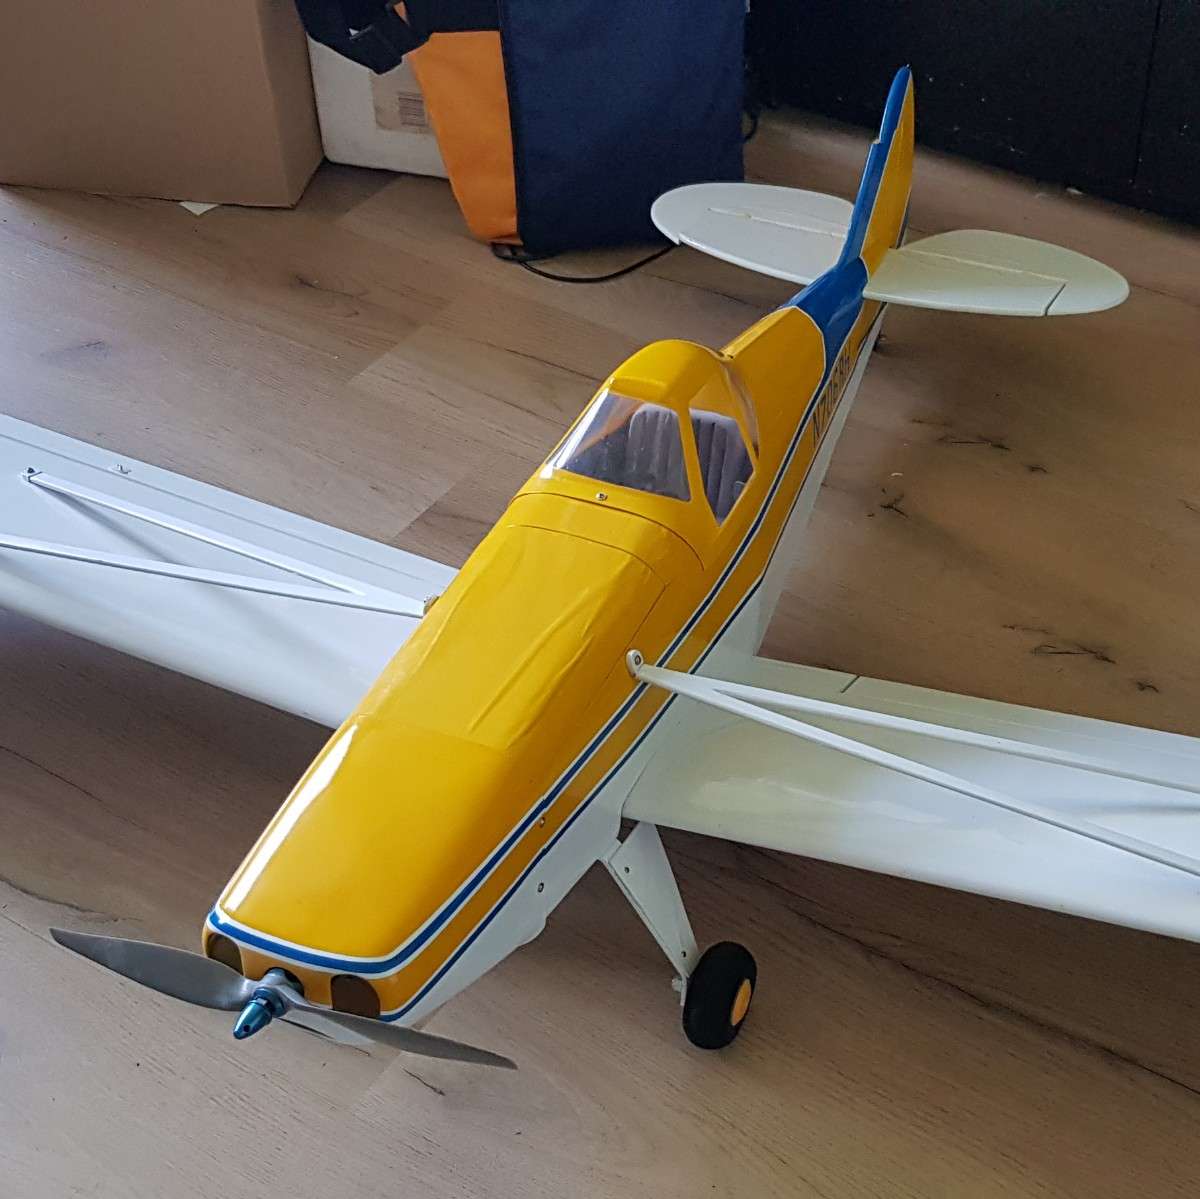 Original NiceSky Mini Hurricane 700mm Wingspan Warbird RC Airplane Kit Gift Details about   NEW 